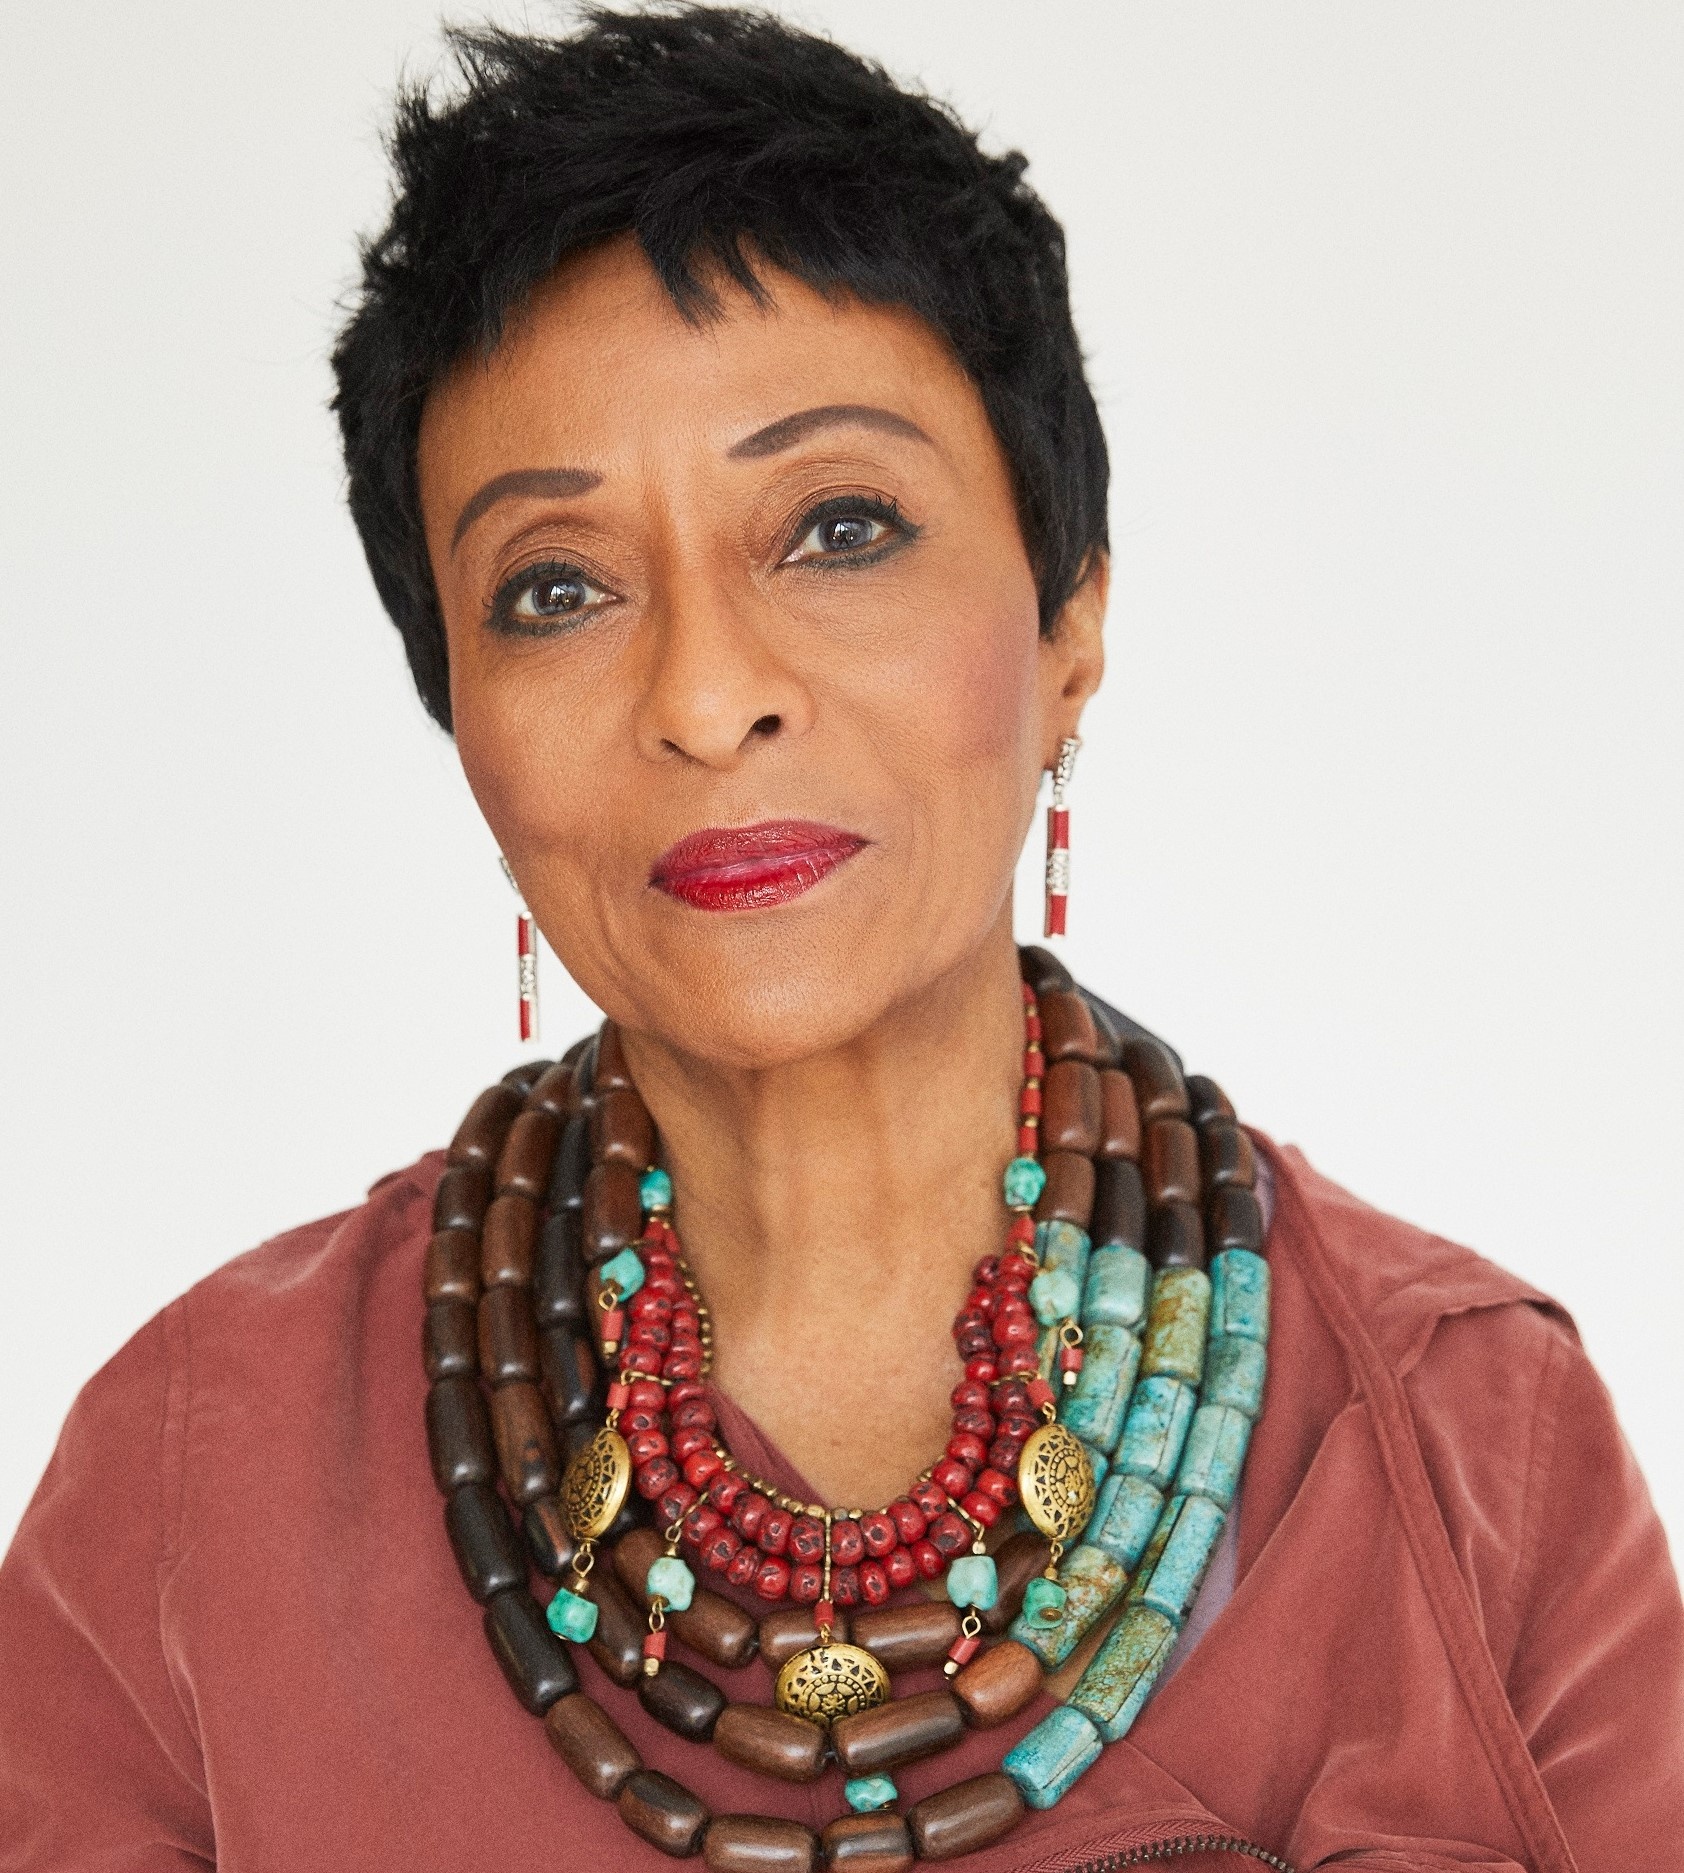 A Black woman with short-cropped dark hair arches one eyebrow. She wears bright red lipstick and a necklace with large brown and turquoise beads looped around her neck several times.  